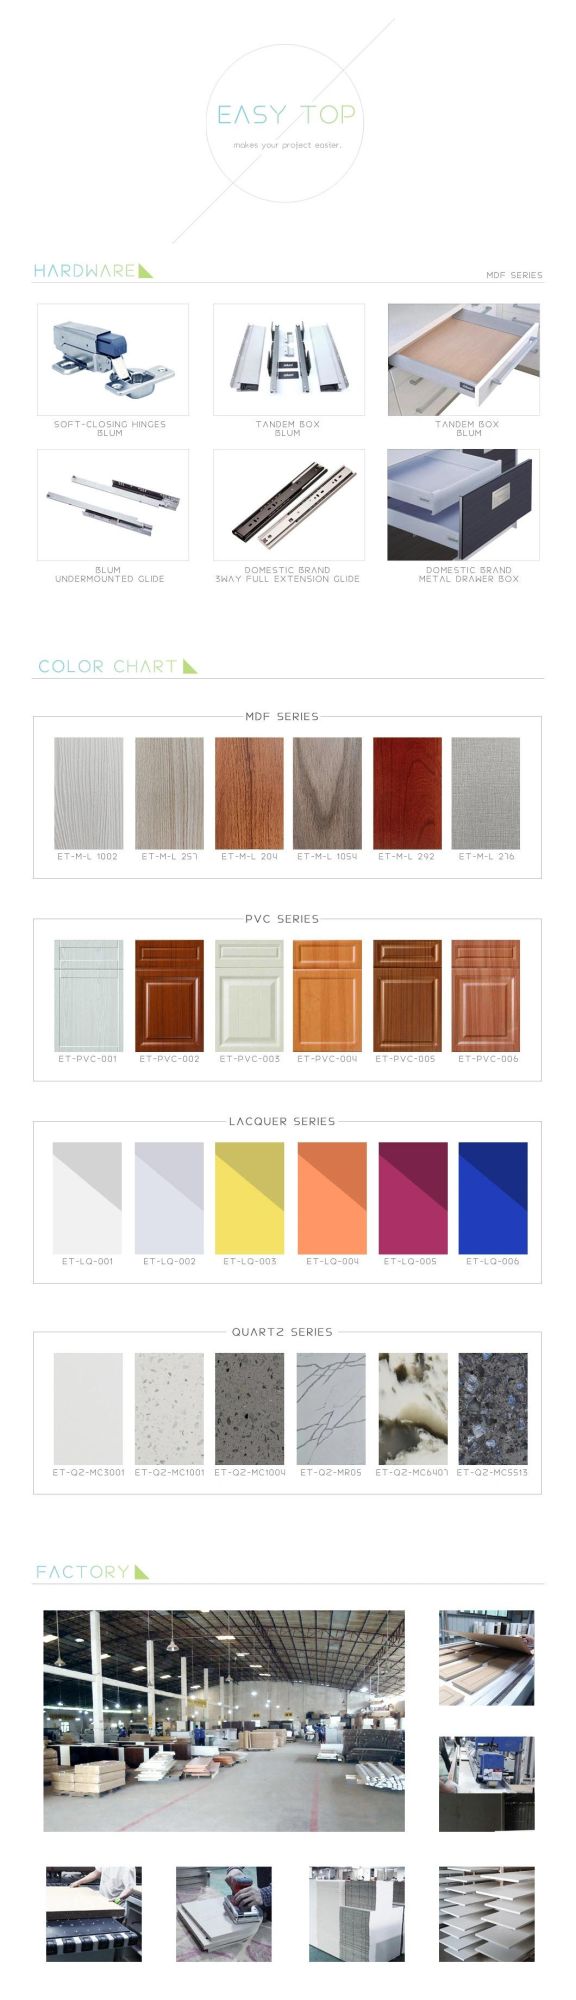 Linear Design Matt White Mix Color Wood Grain Joinery Waterfall Cabinets